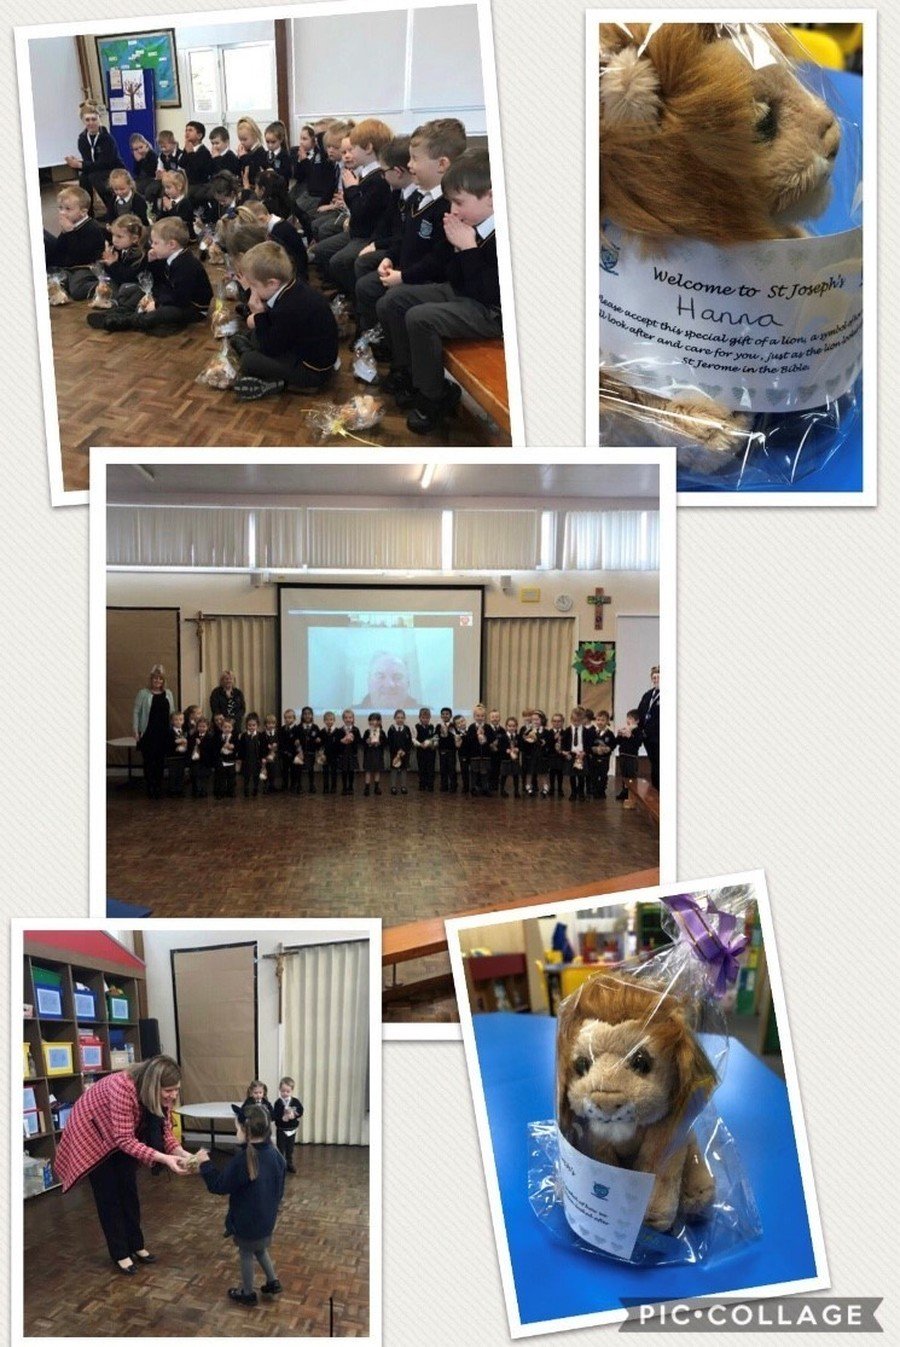 Our lovely ‘Passing On The Faith’ gift was presented to our new starters. Our lovely children understand that their lions are symbolic of us protecting & taking good care of them as they begin their faith journey, just as the lion protected & took care of St Jerome in the bible.